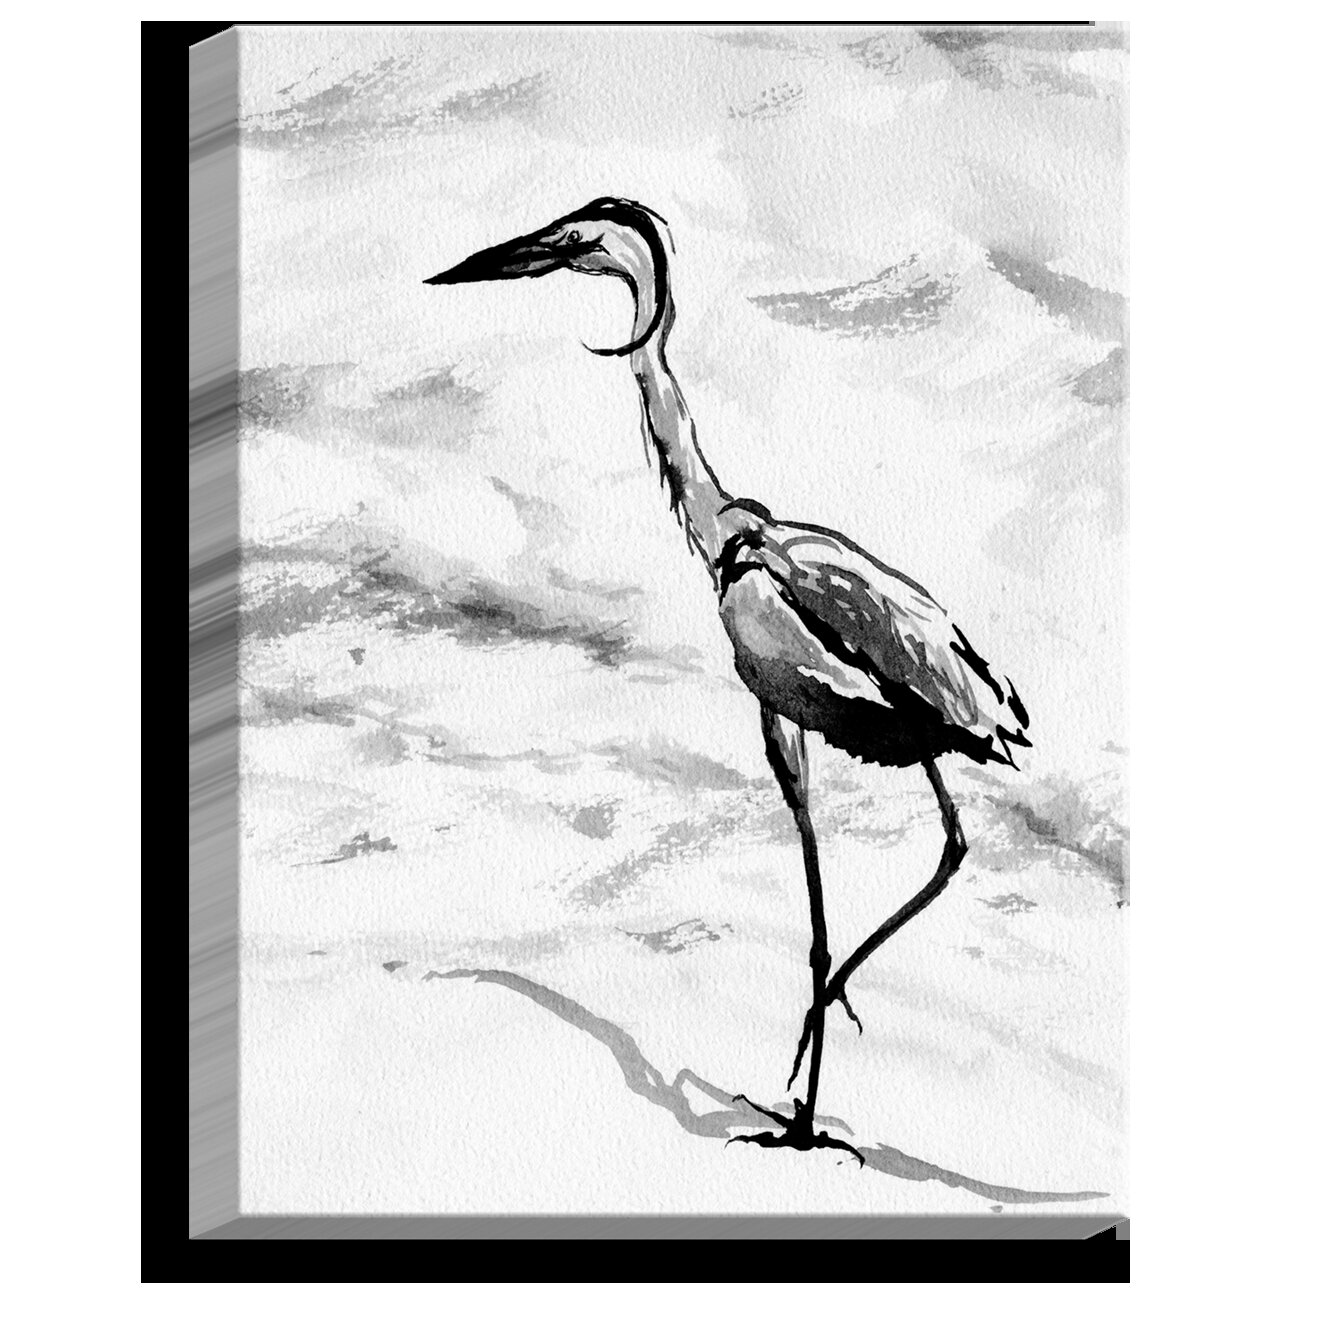 DiaNocheDesigns Heron Framed On Canvas by Brazen Design Studio Painting